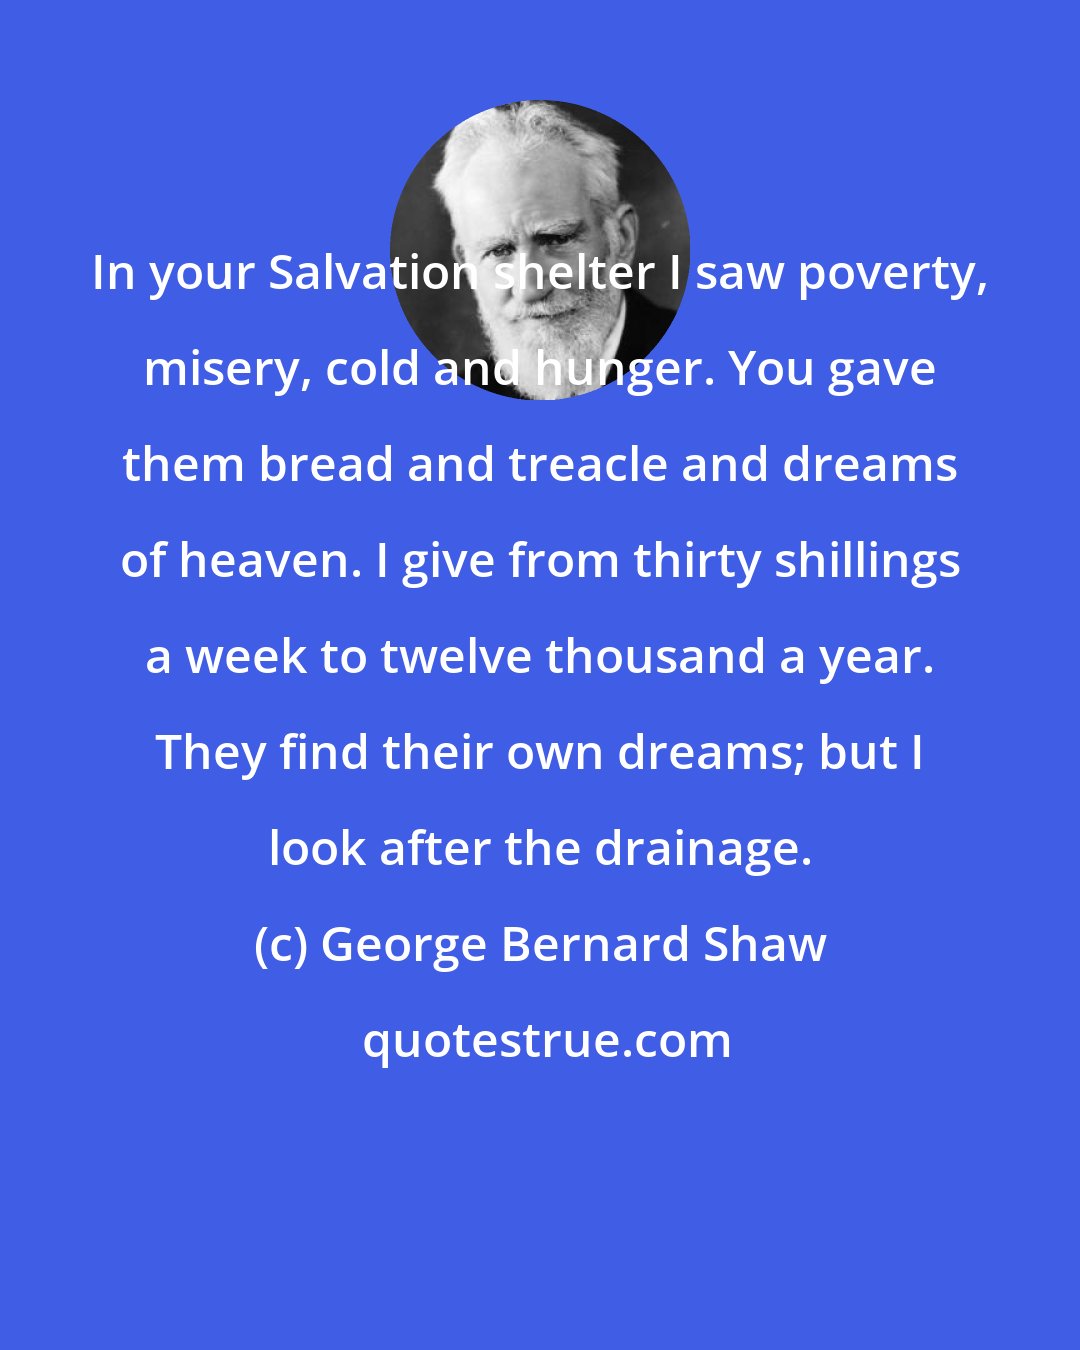 George Bernard Shaw: In your Salvation shelter I saw poverty, misery, cold and hunger. You gave them bread and treacle and dreams of heaven. I give from thirty shillings a week to twelve thousand a year. They find their own dreams; but I look after the drainage.